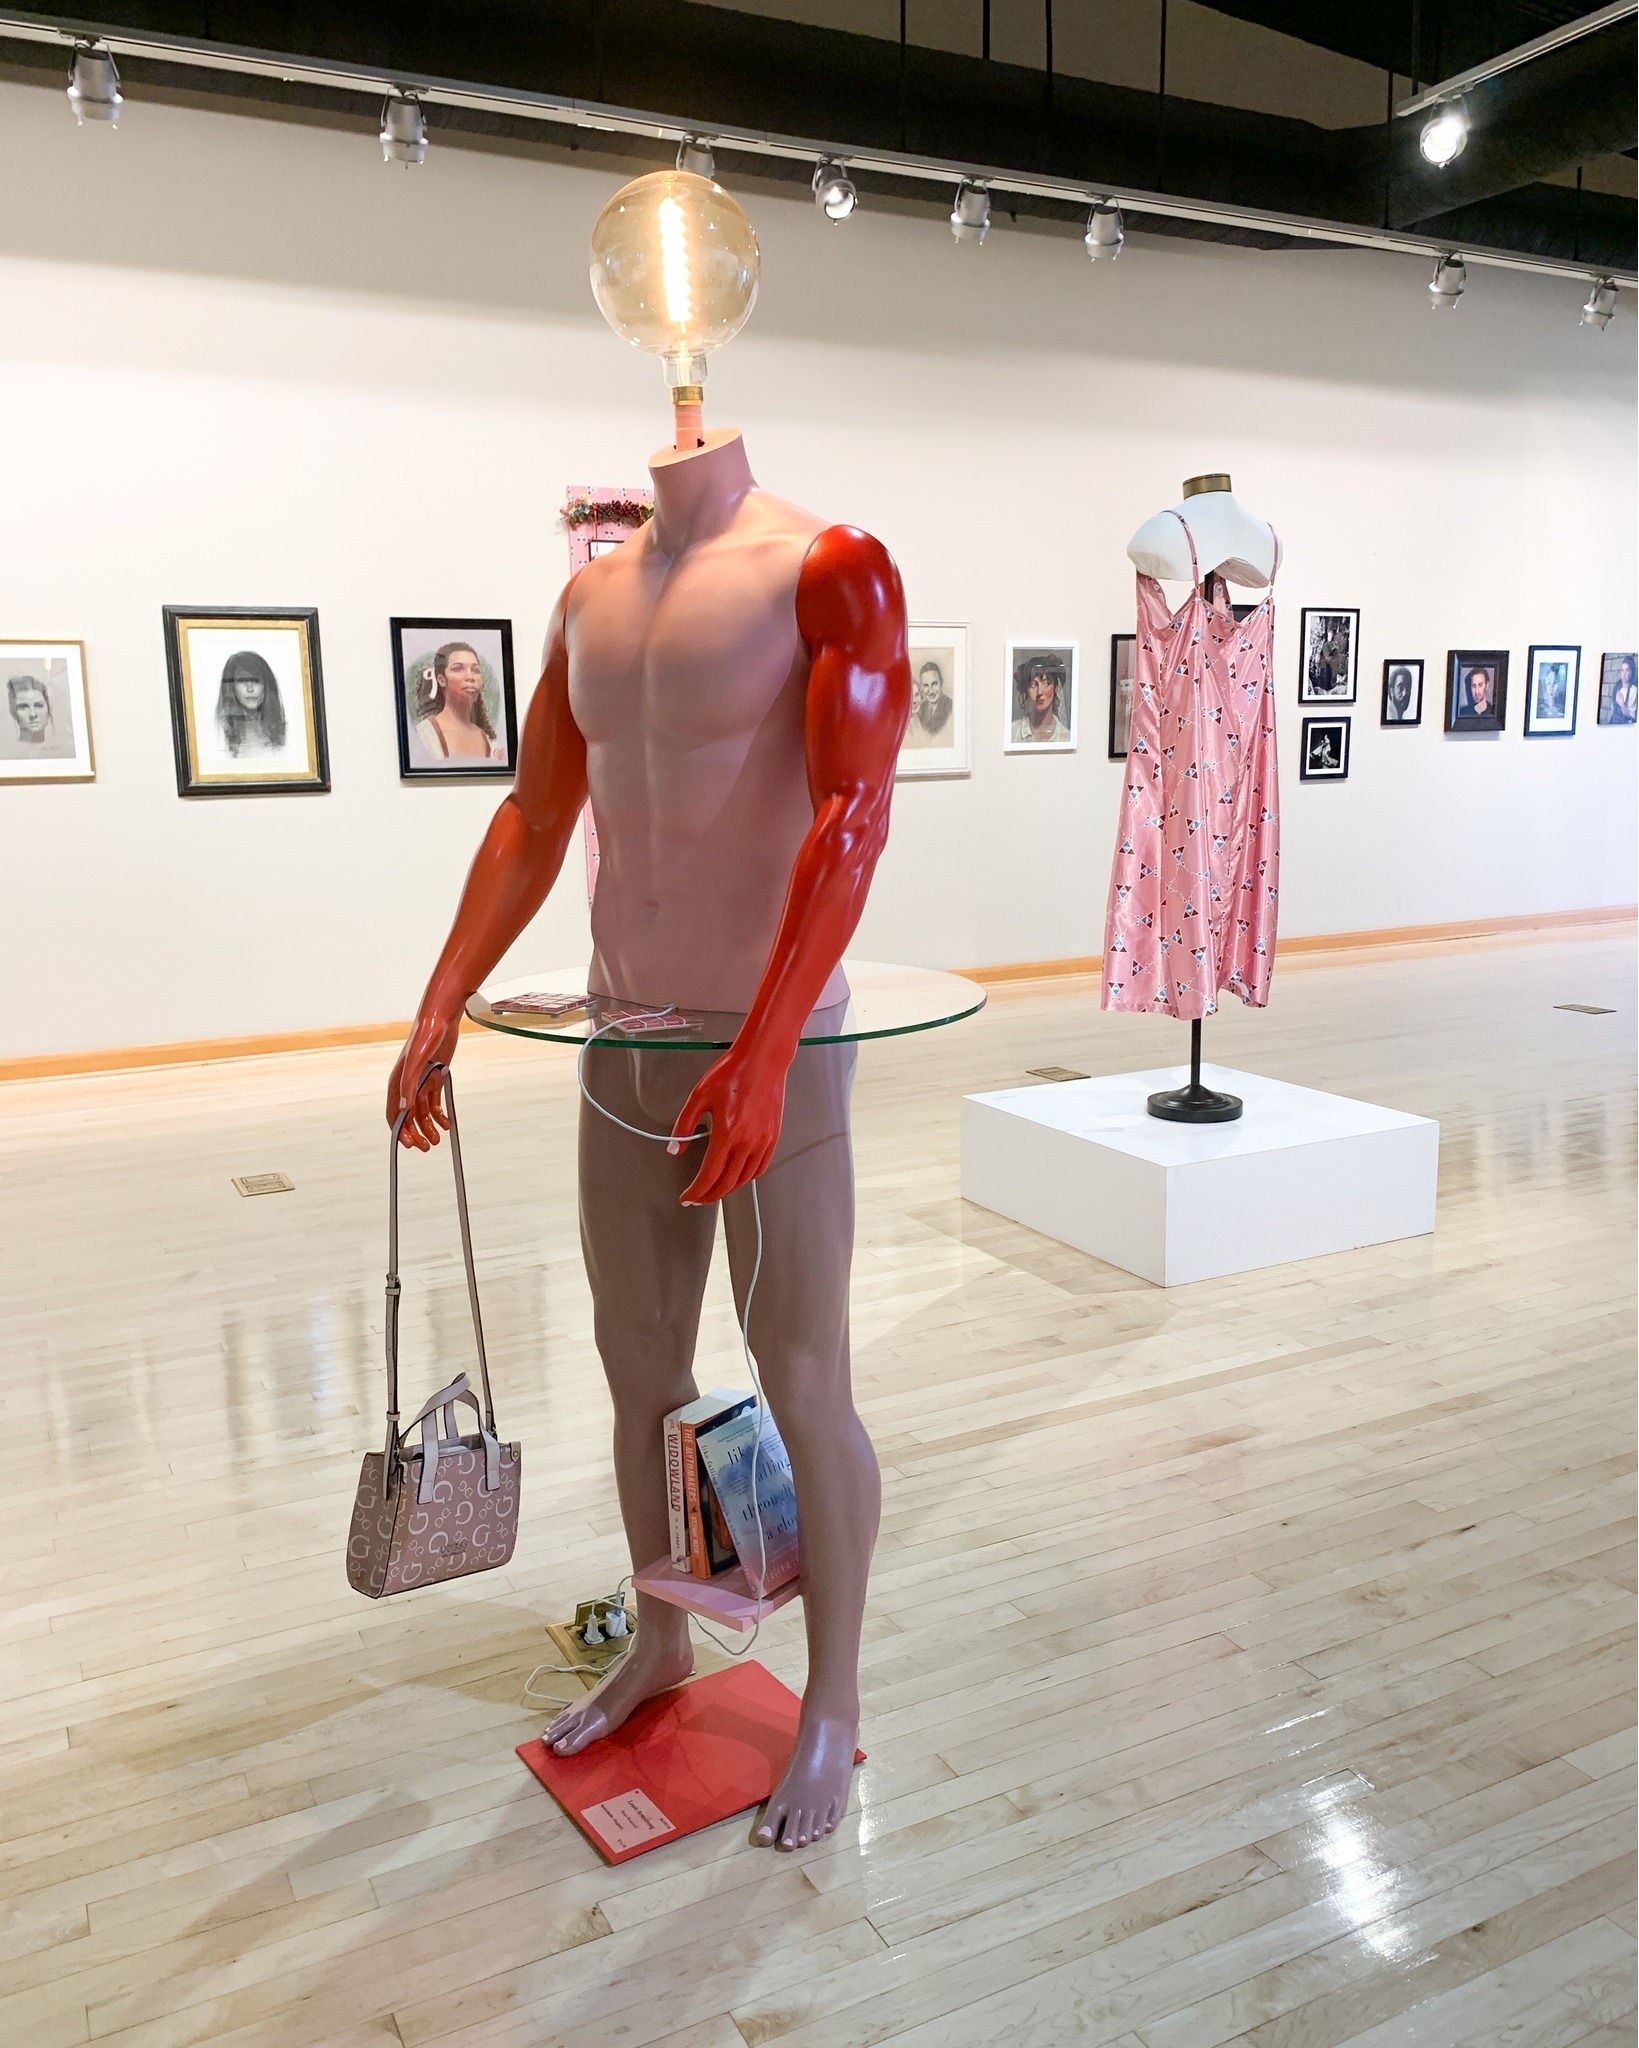 Sears Art Museum to showcase pieces from Utah Tech University students, faculty